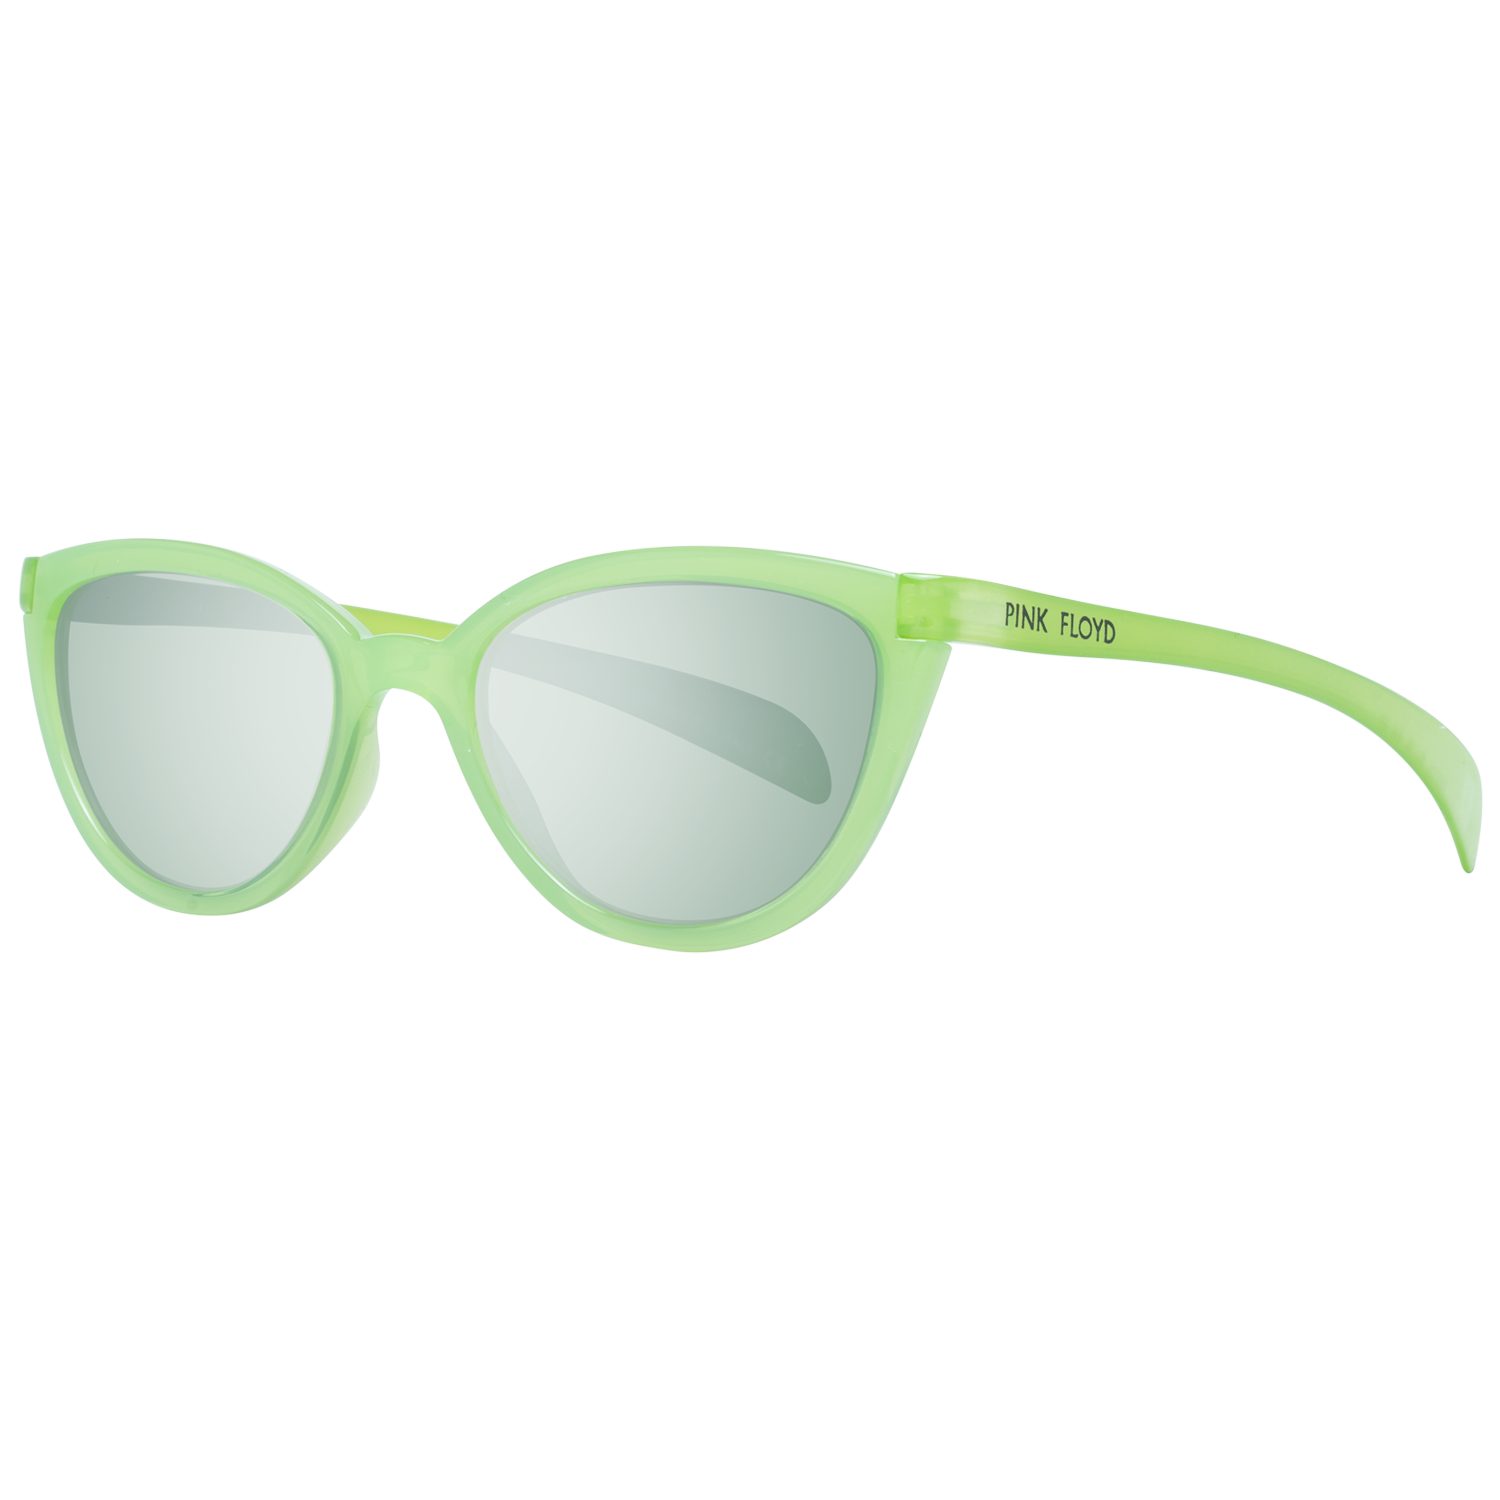 Try Cover Change Sonnenbrille TS501 5003